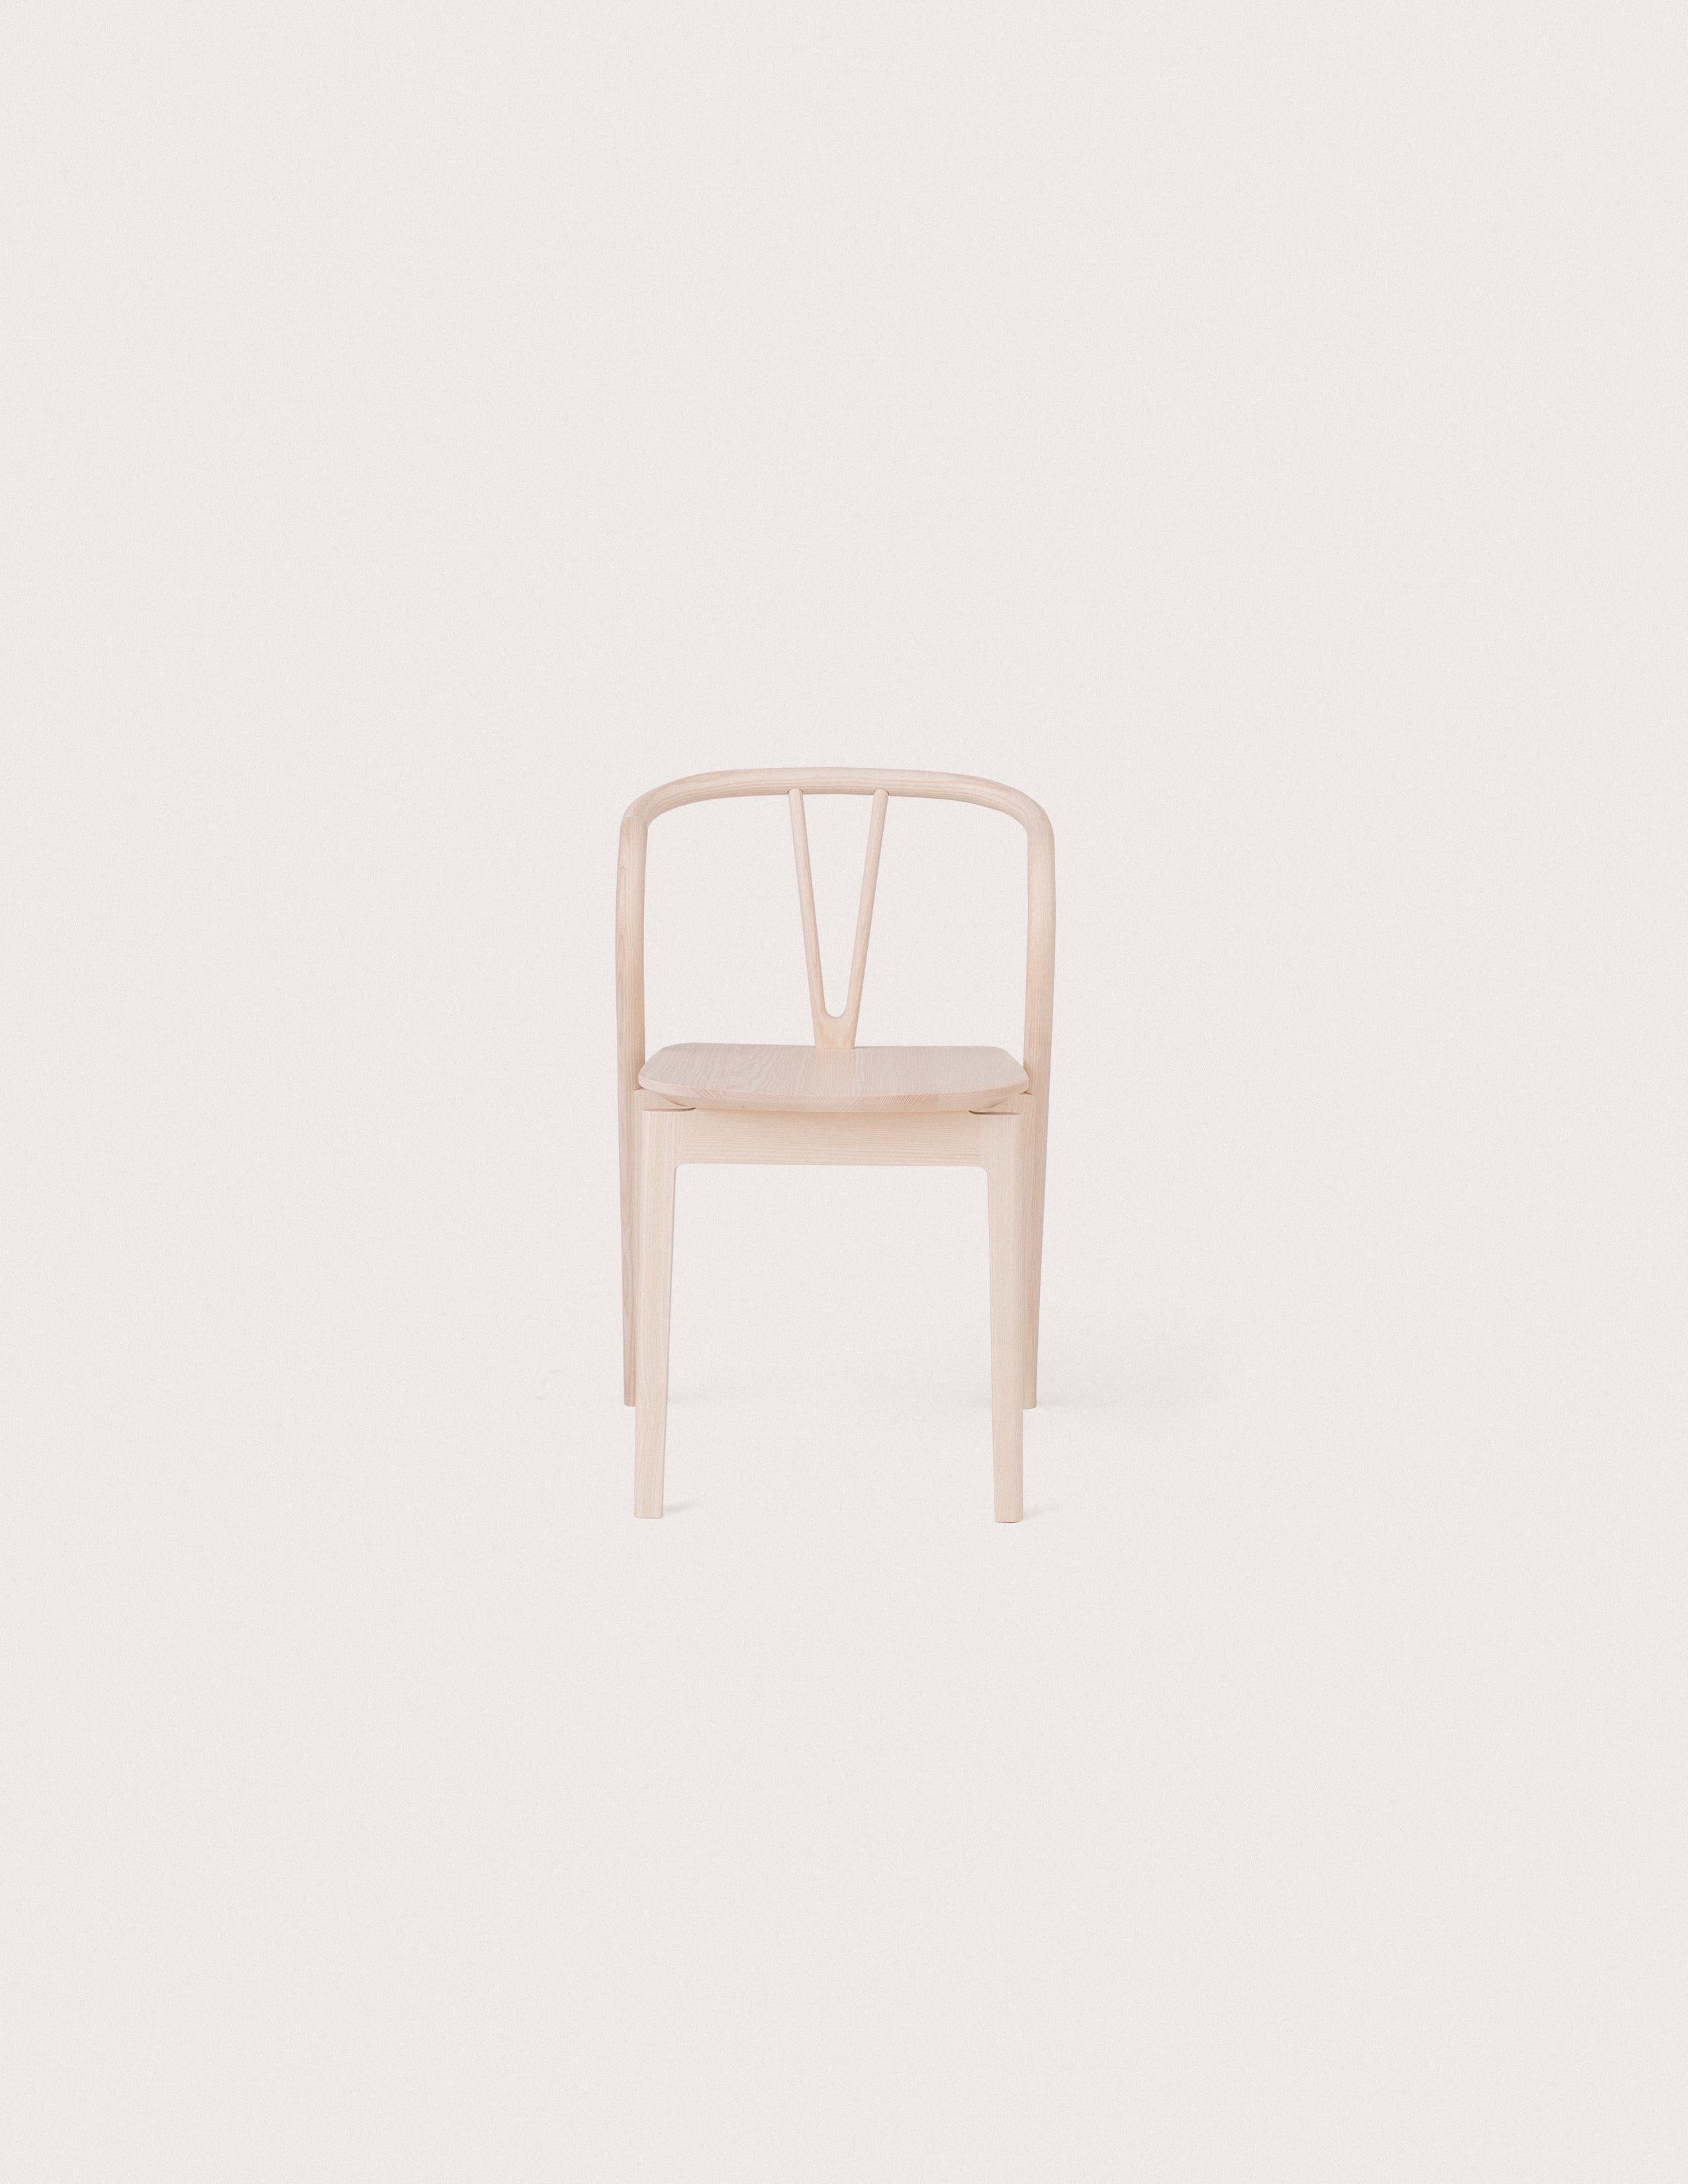 Taking its name from the fluid, sweeping lines produced by steam-bent timber, the FLOW CHAIR was born out of a collaboration with Japanese designer, Tomoko Azumi. Designed in 2015, the FLOW CHAIR exemplifies the warm elegance of contemporary